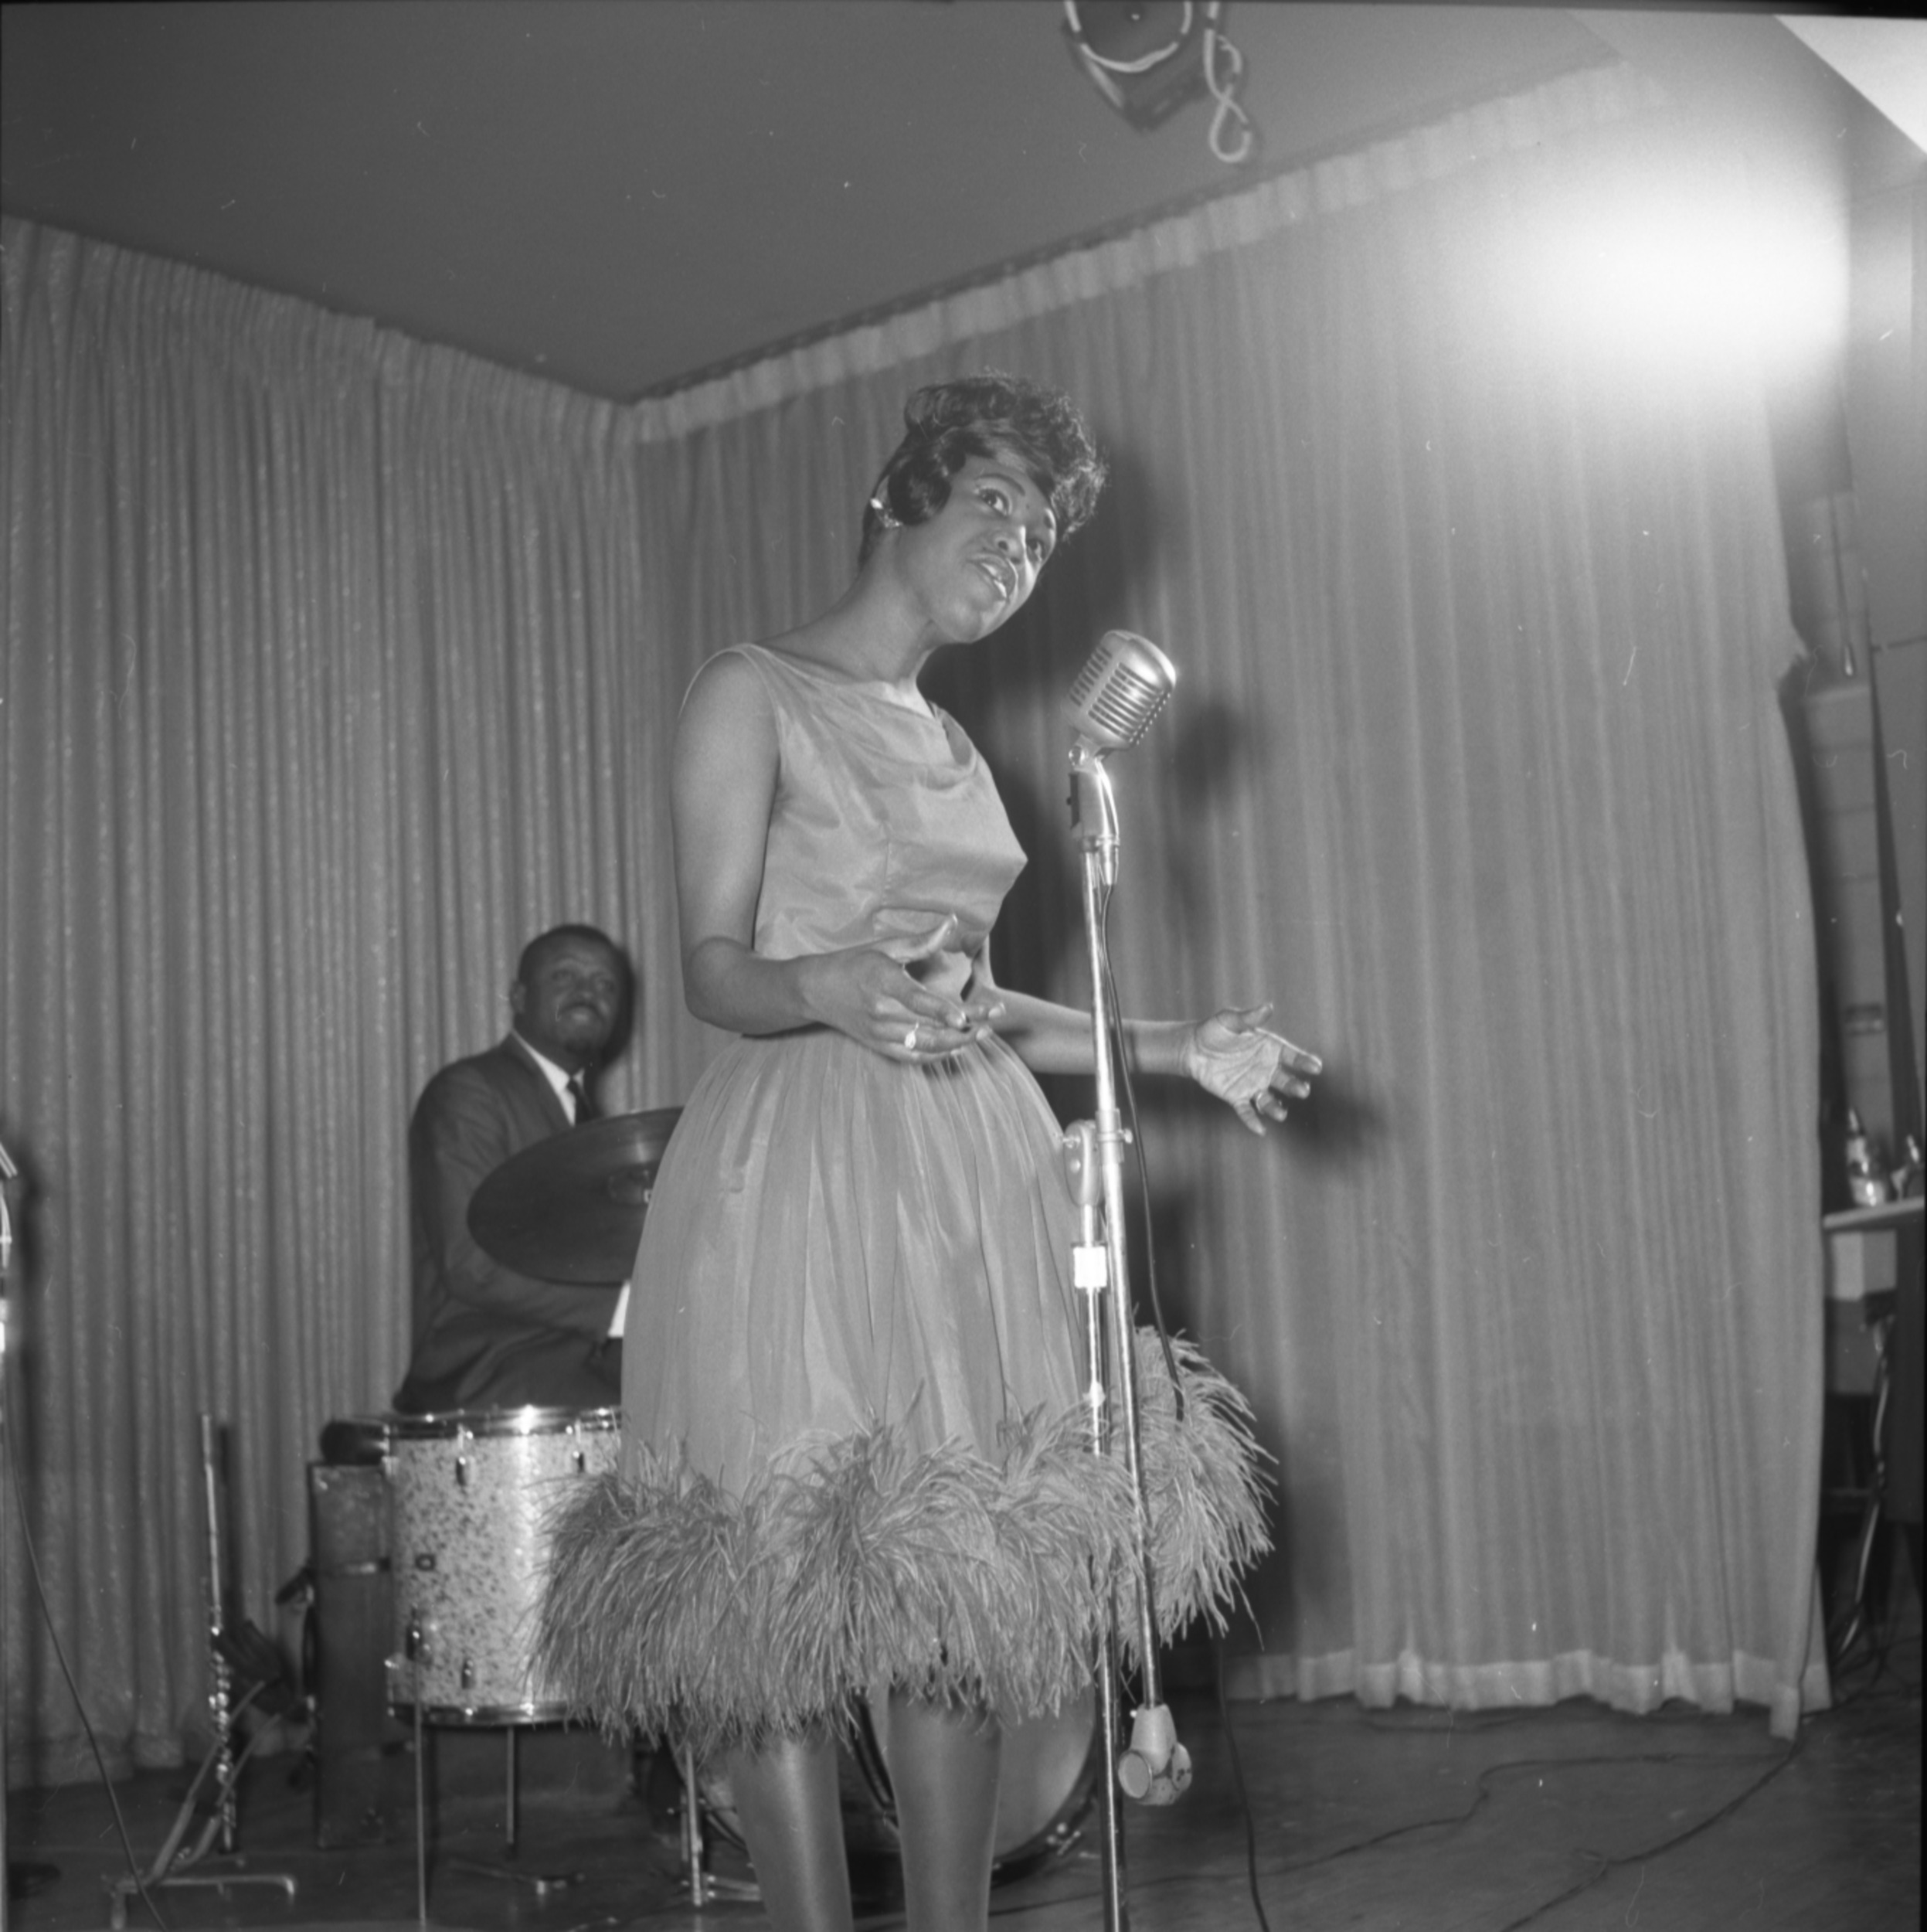 Carver House, March 14, 1962, Image 06